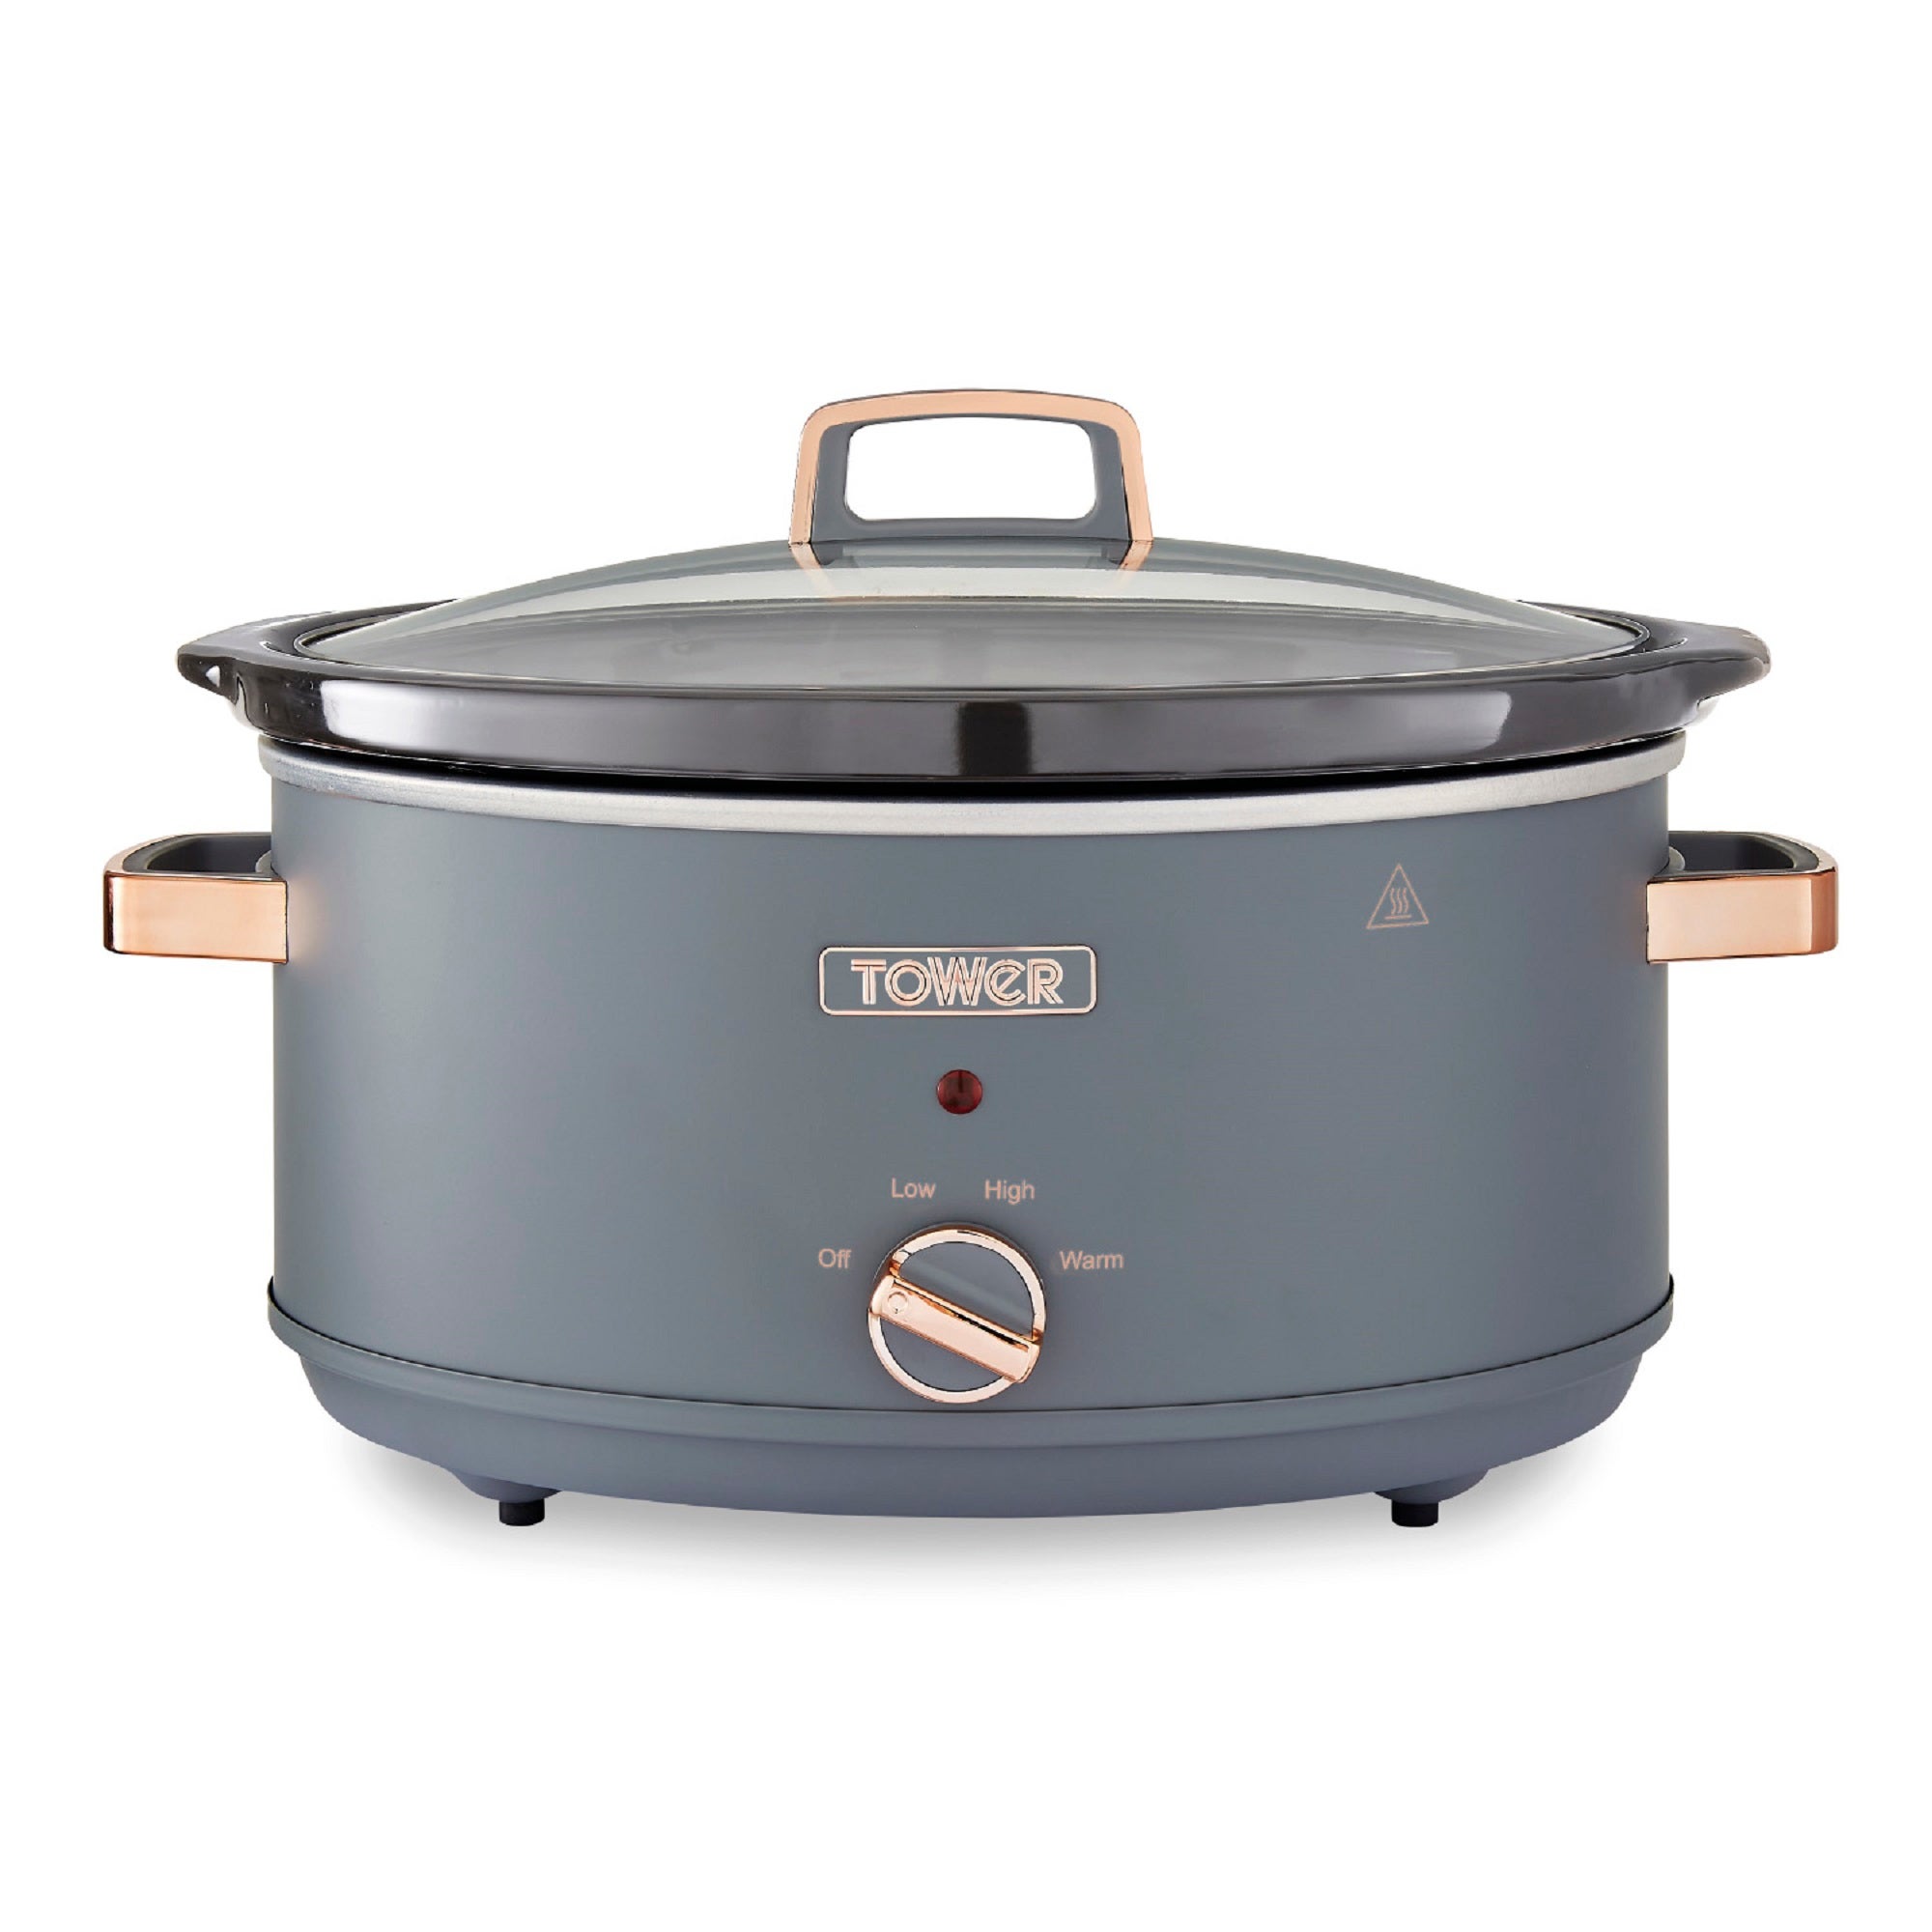 Noel Grimley Electrics - Tower T16040 6 5L Slow Cooker Stainless Steel